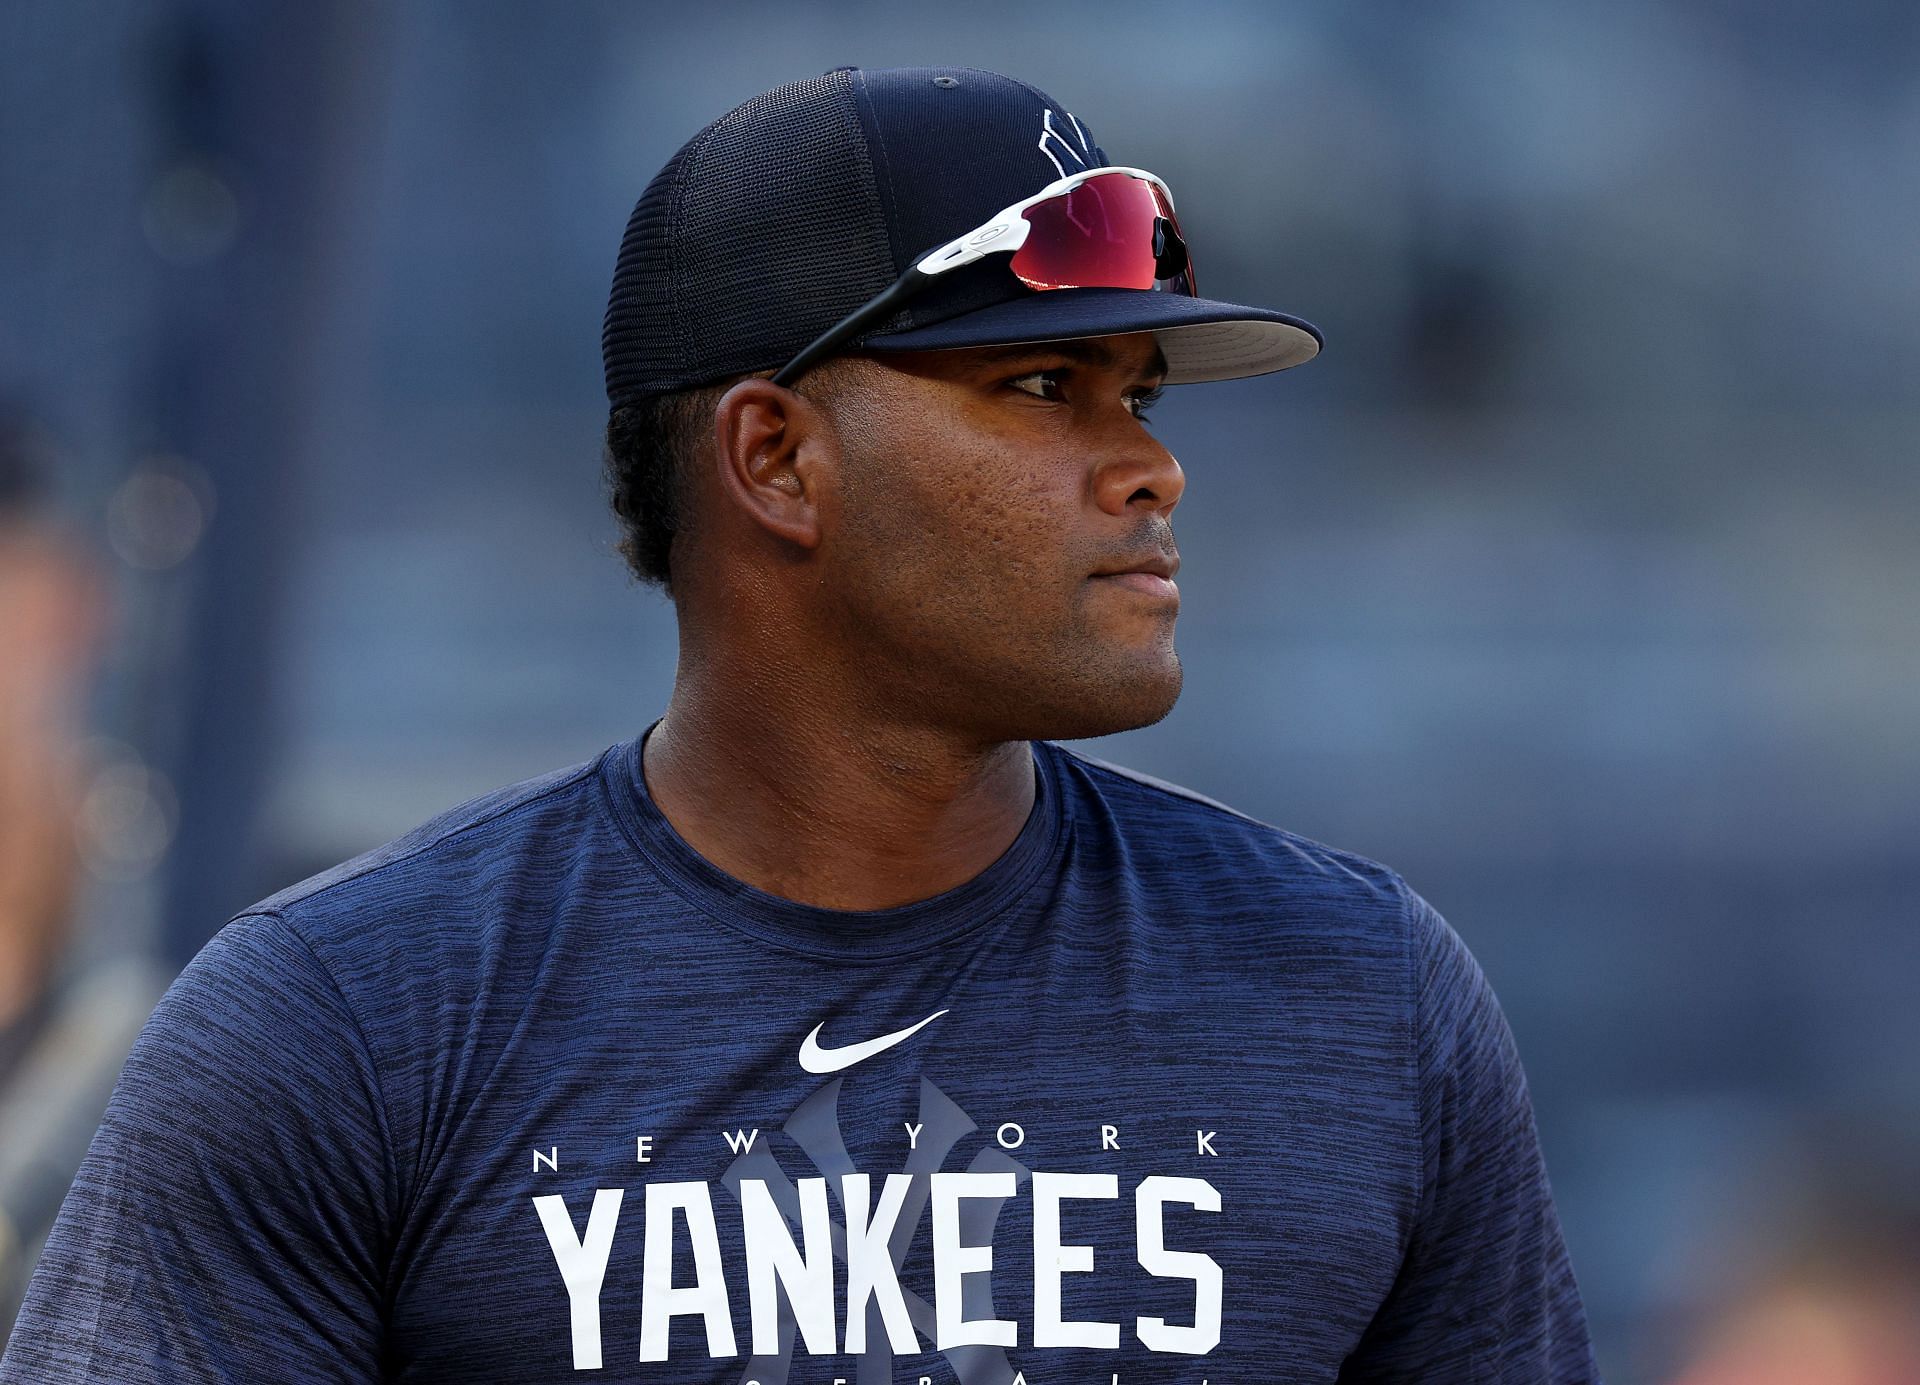 Franchy Cordero #33 of the New York Yankees steps out of the cage during batting practice before the game against the Minnesota Twins at Yankee Stadium on April 13, 2023